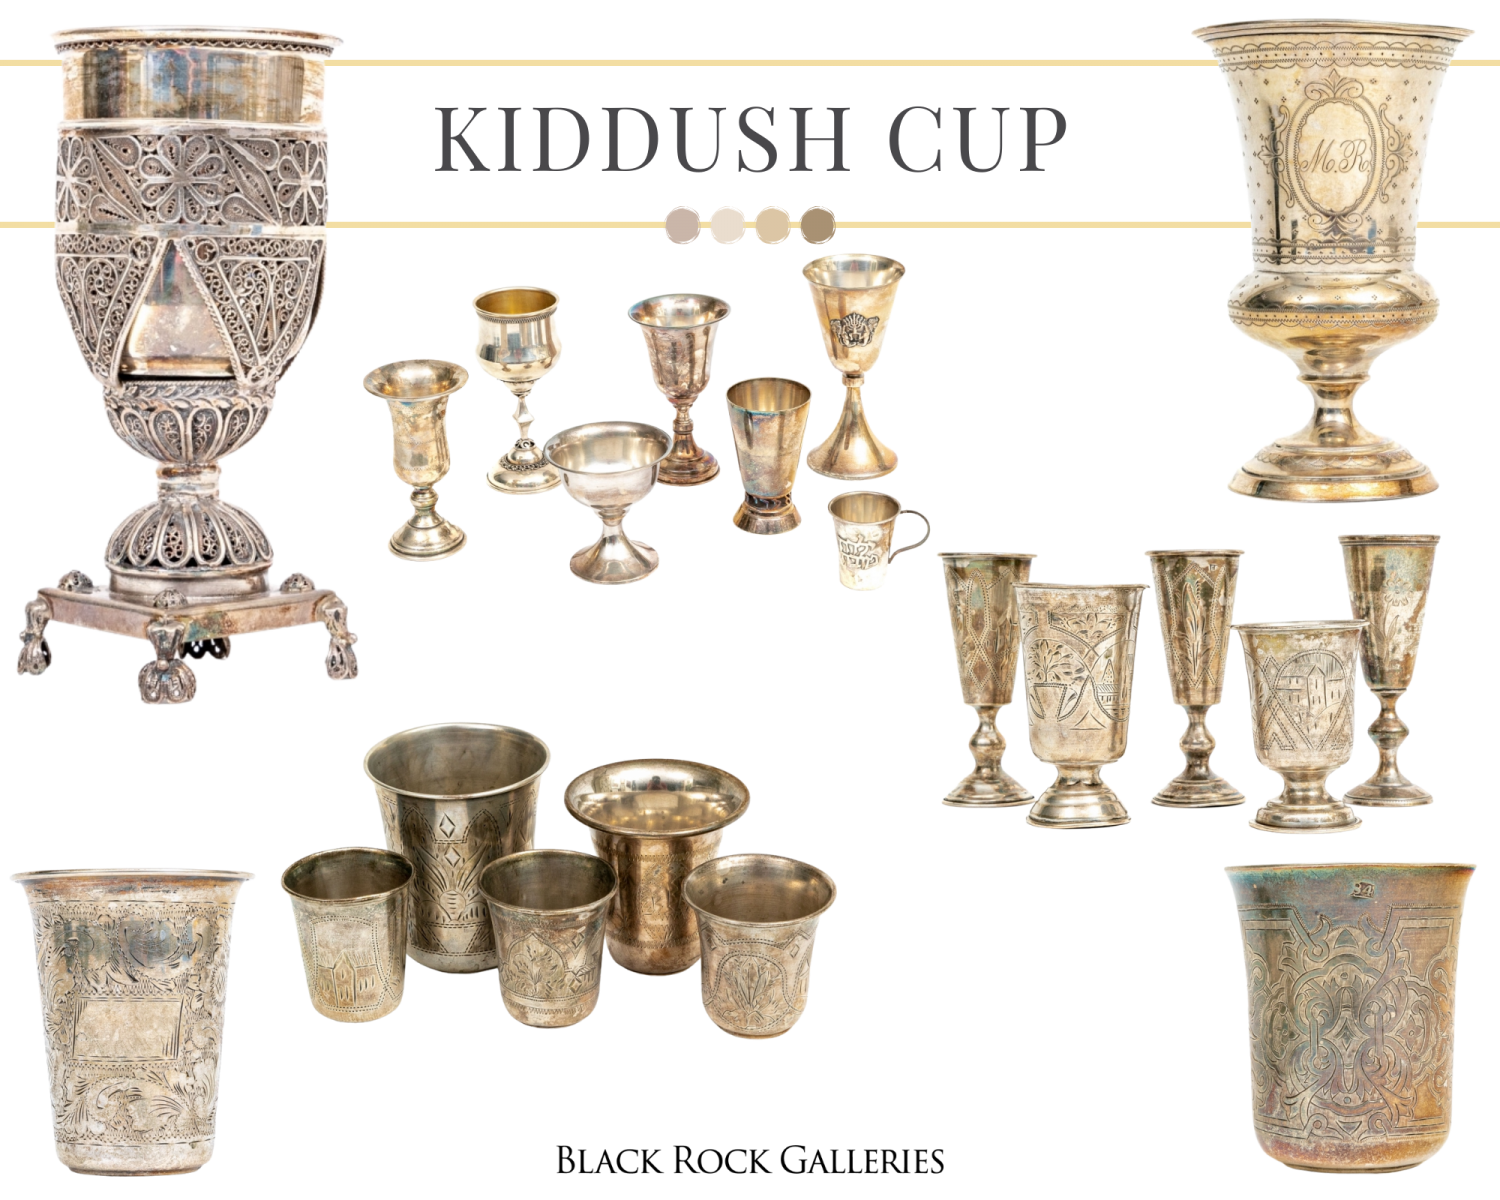 Sterling silver and fine silver Kiddush cups are part of the Miriam and Rabbi Robert Rothman Judaica collection